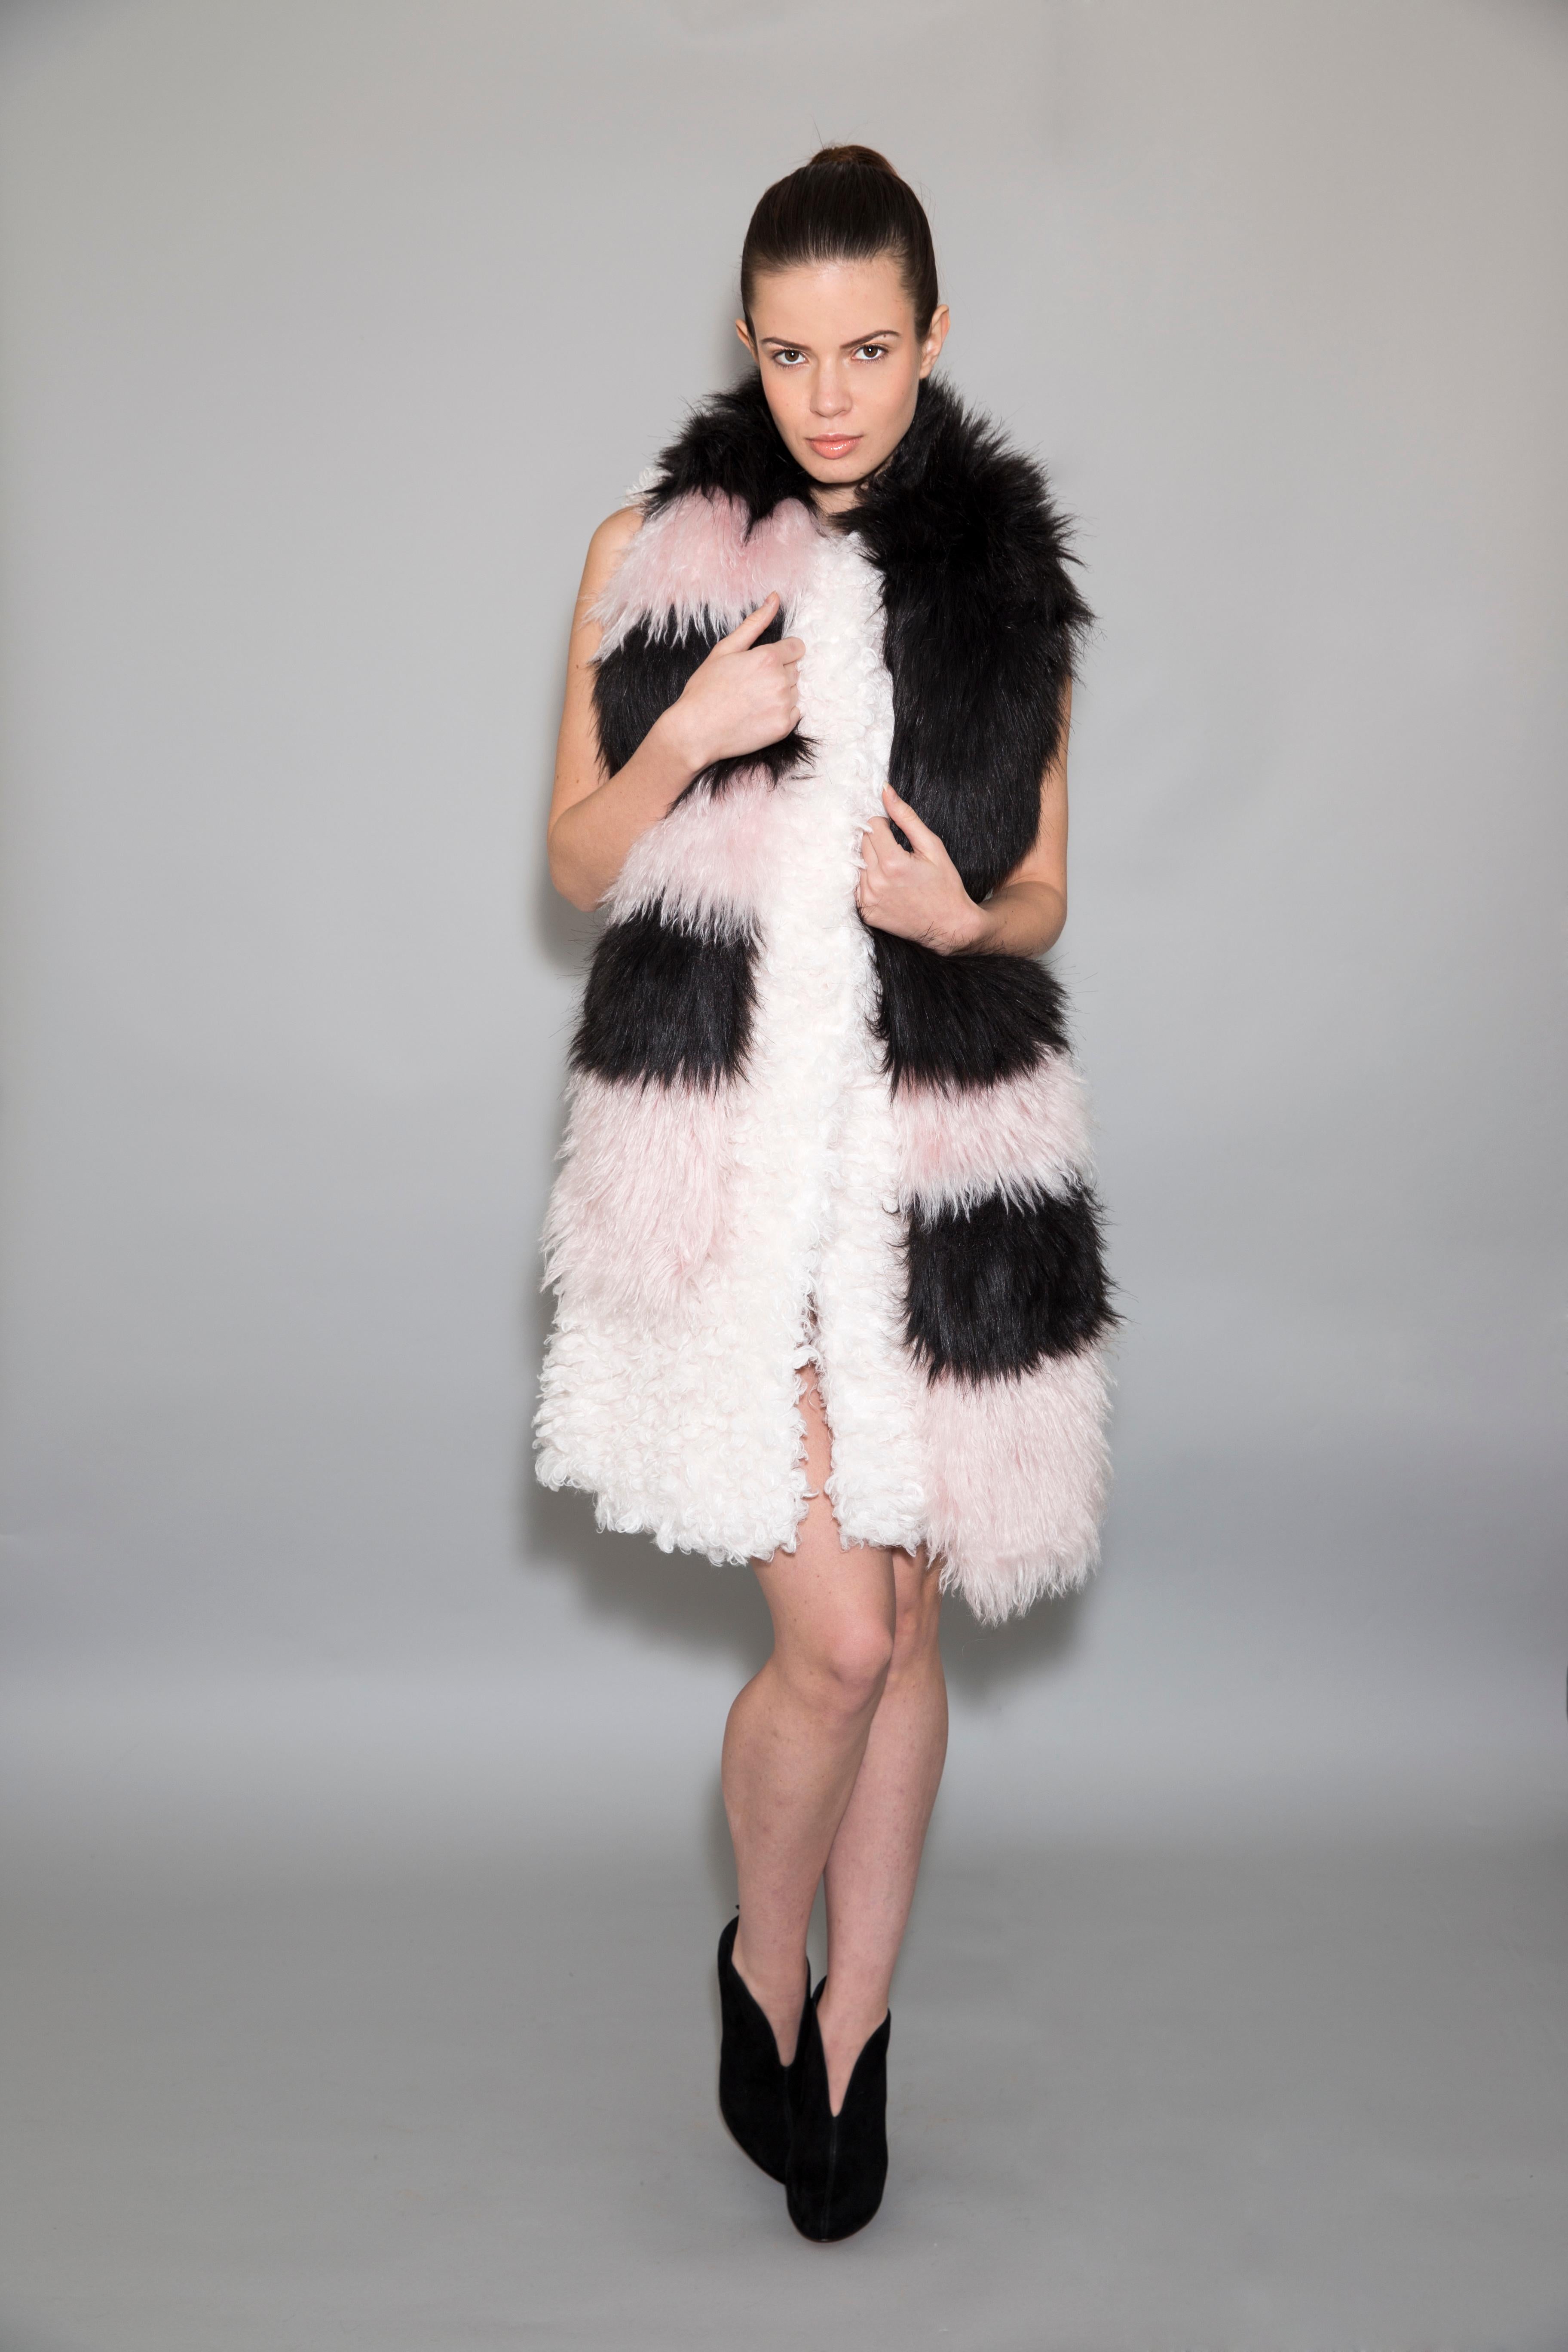 The Pelush Seuss black and pink faux fur and mohair scarf is a one of a kind piece. Featuring the best quality sustainable mohair and man made pelage, this stylish striped long scarf makes a fun and glamorous statement. Timeless, warm and useful